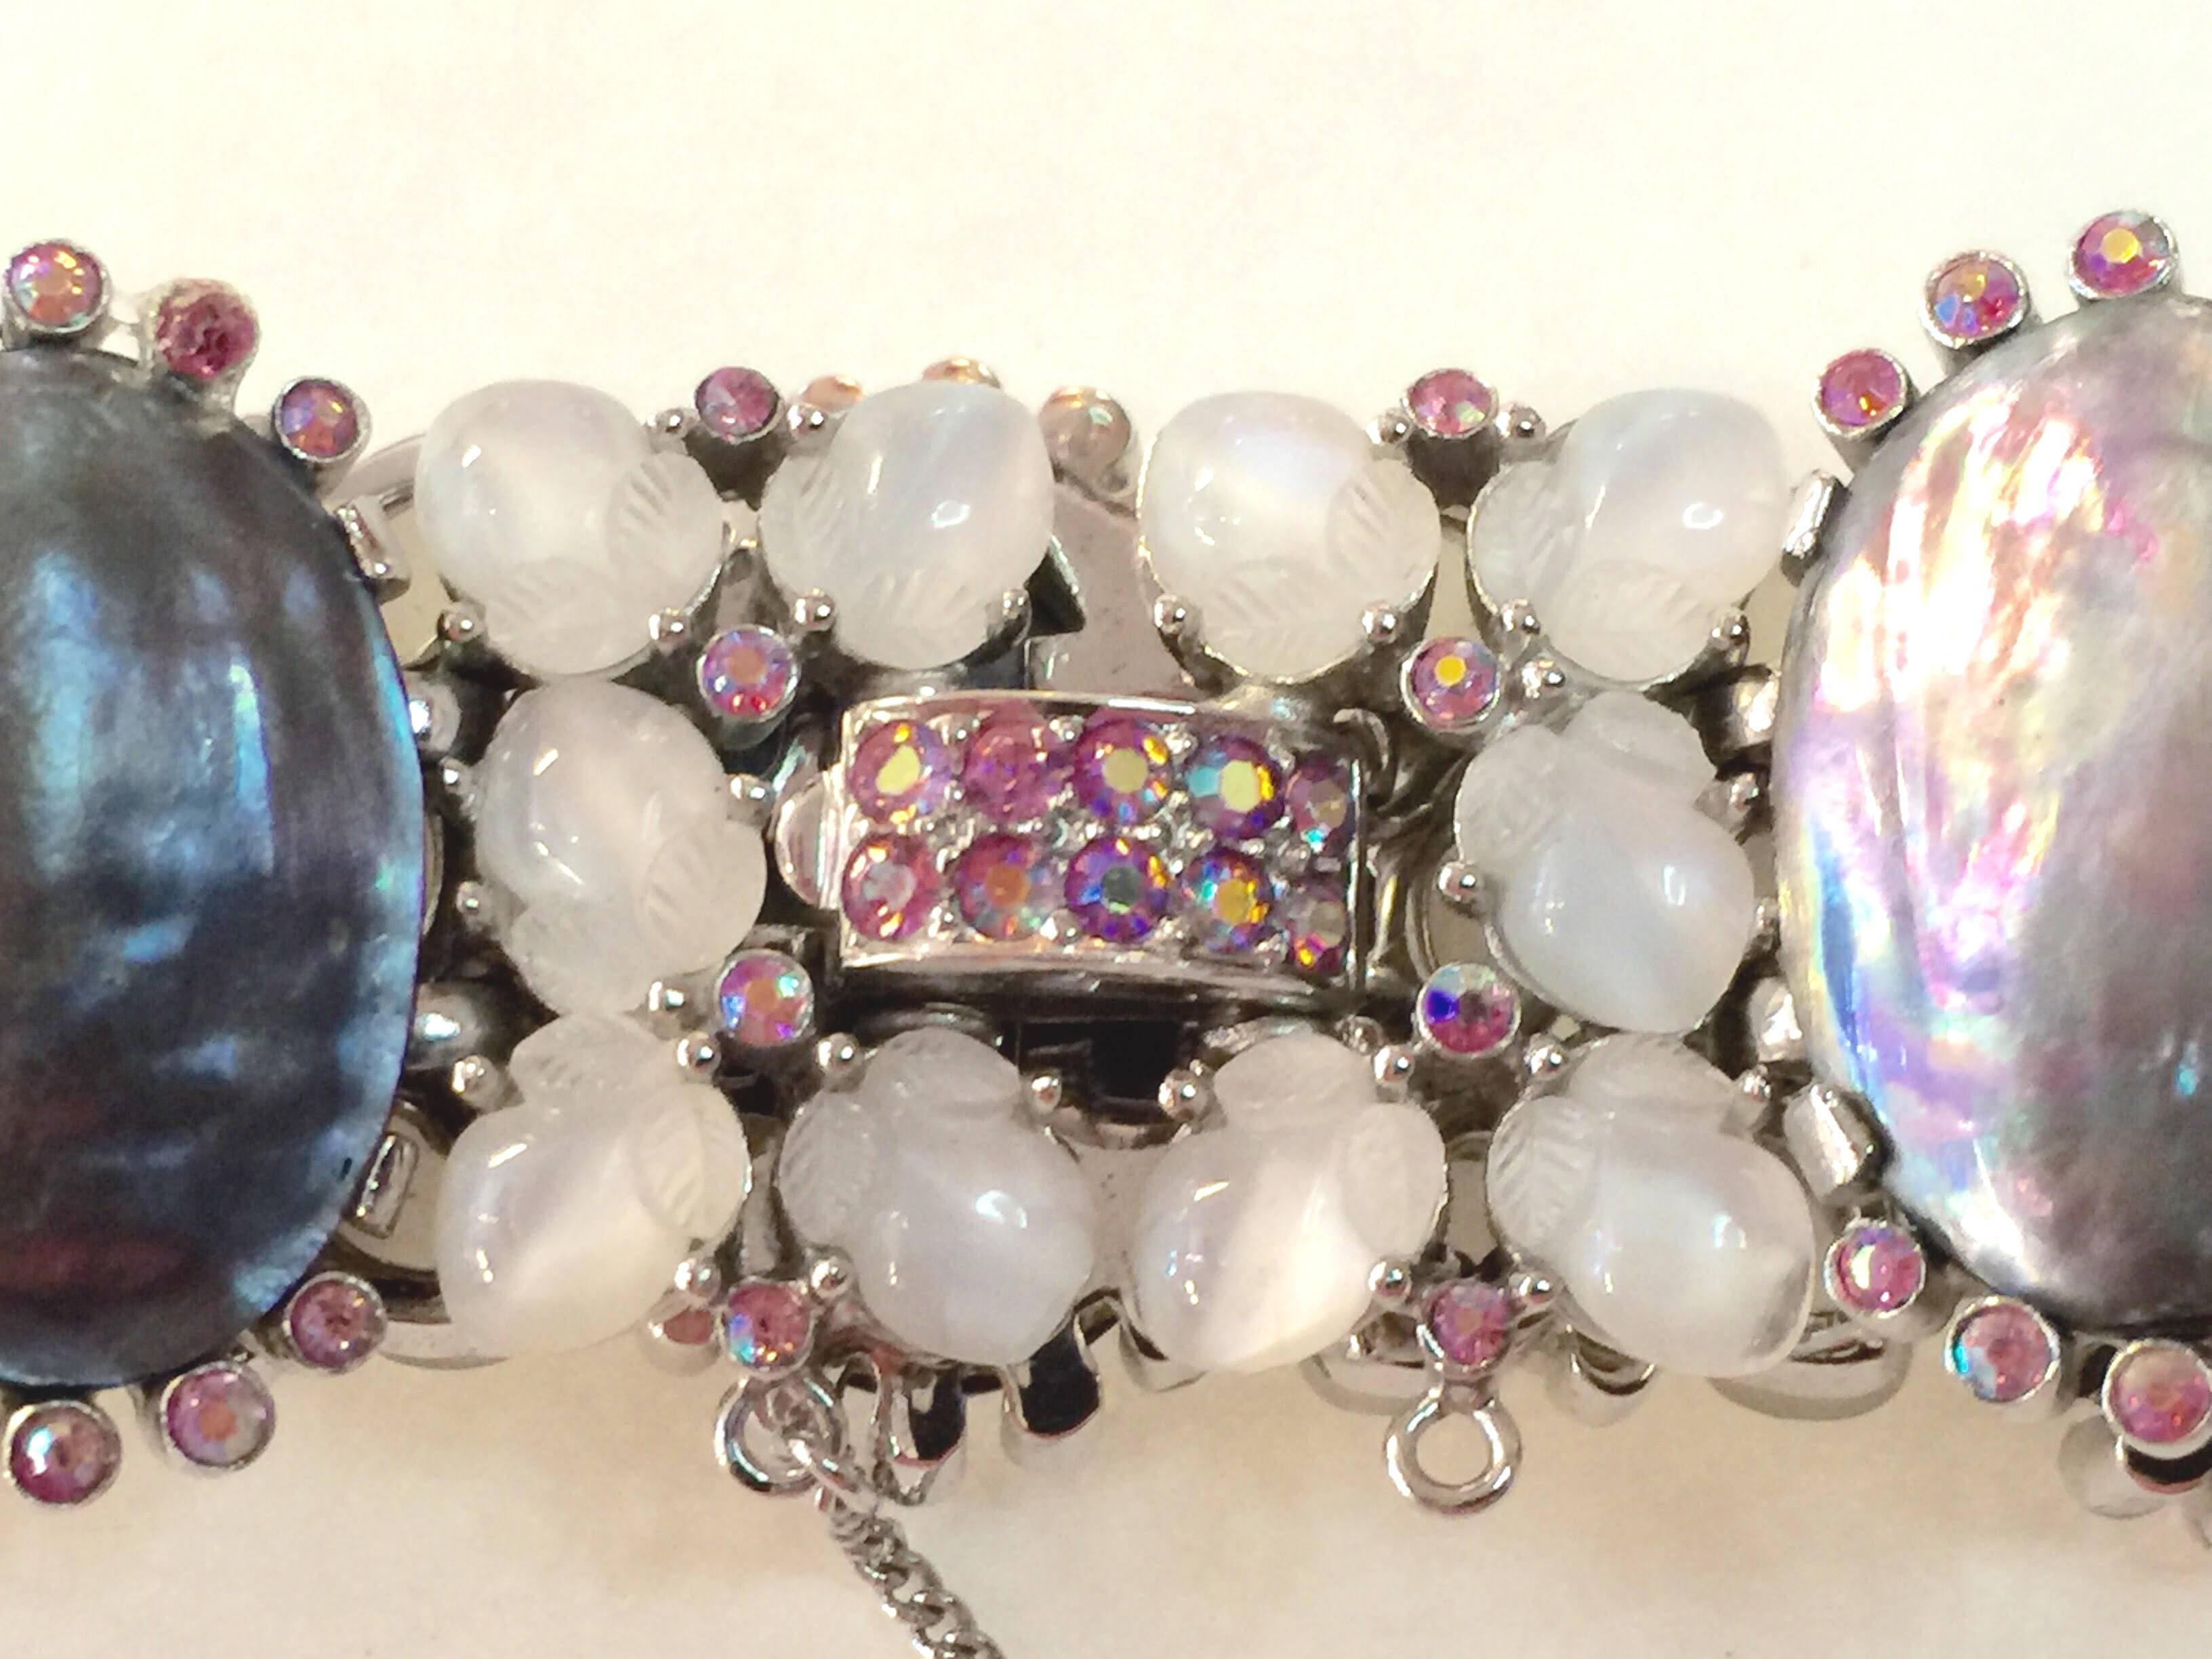 A masterwork of designer Alfred Phillipe's work for this most storied of American Vintage Costume Jewelry companies, this VERY RARE Trifari Moonstone Fruit Salad Pink Borealis Mother of Pearl Bracelet is SPECIAL. Oval Mother of Pearl plaques set in